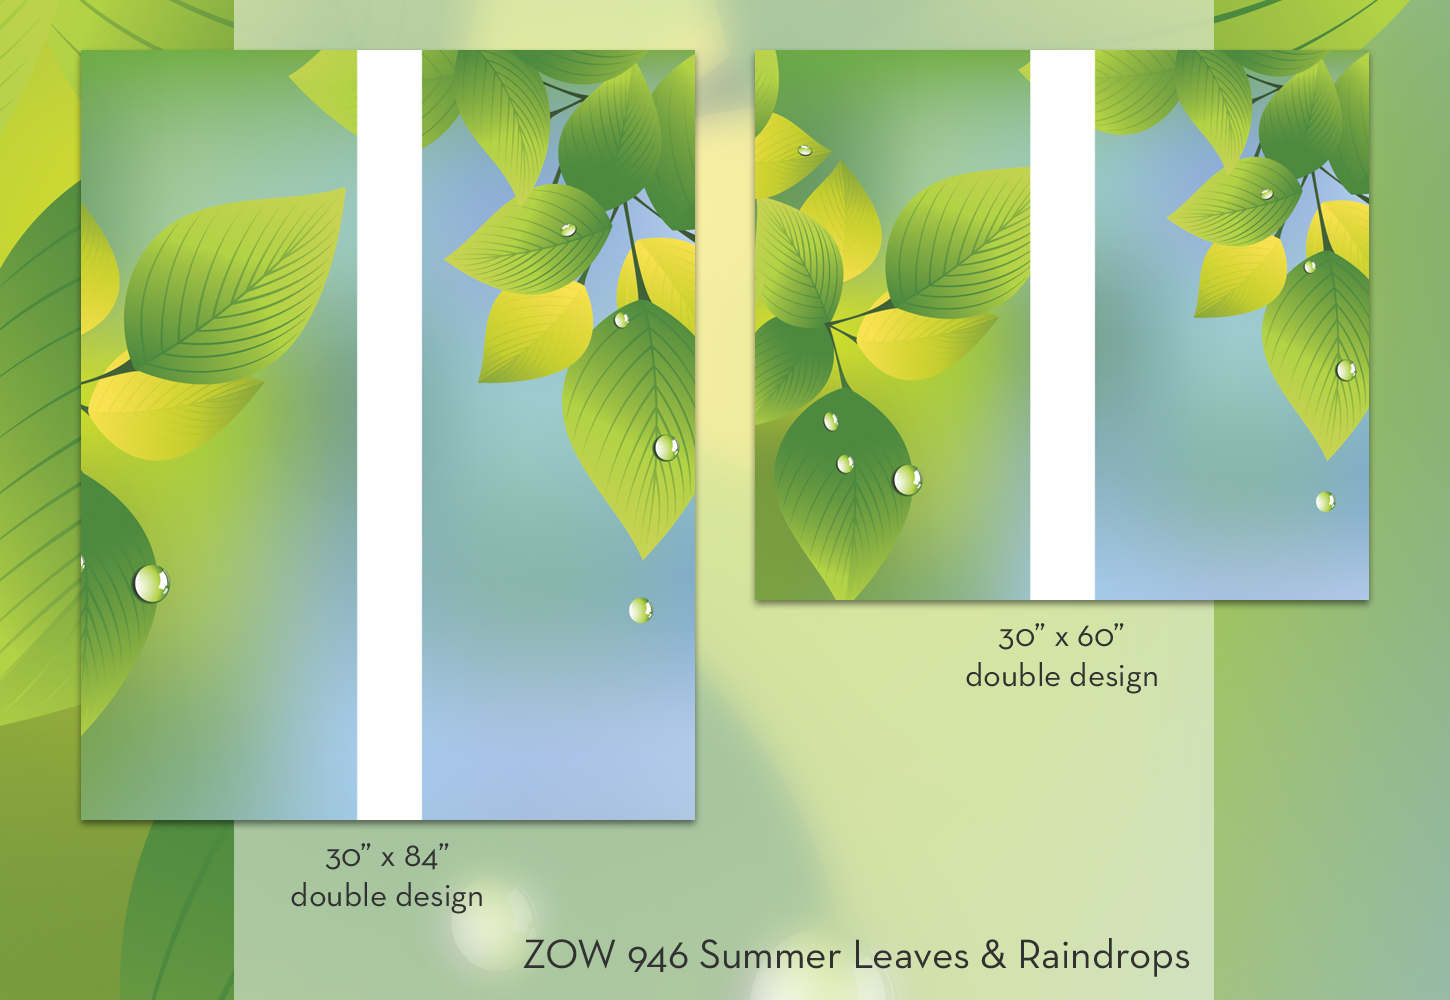 ZOW 946 Summer Leaves & Raindrops